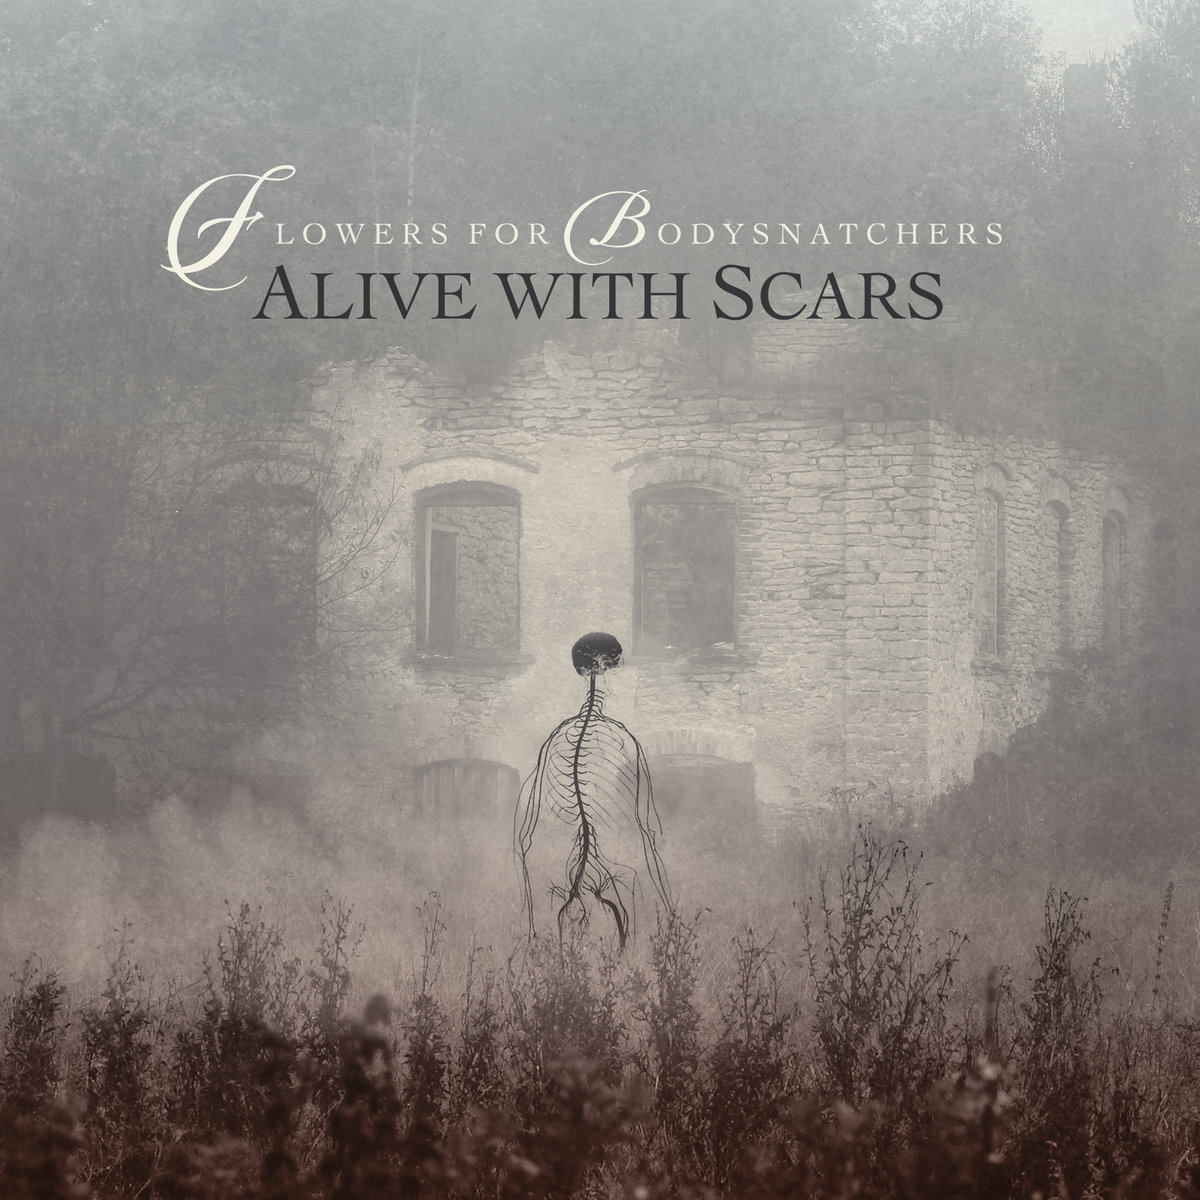 Flowers for Bodysnatchers – Alive with Scars